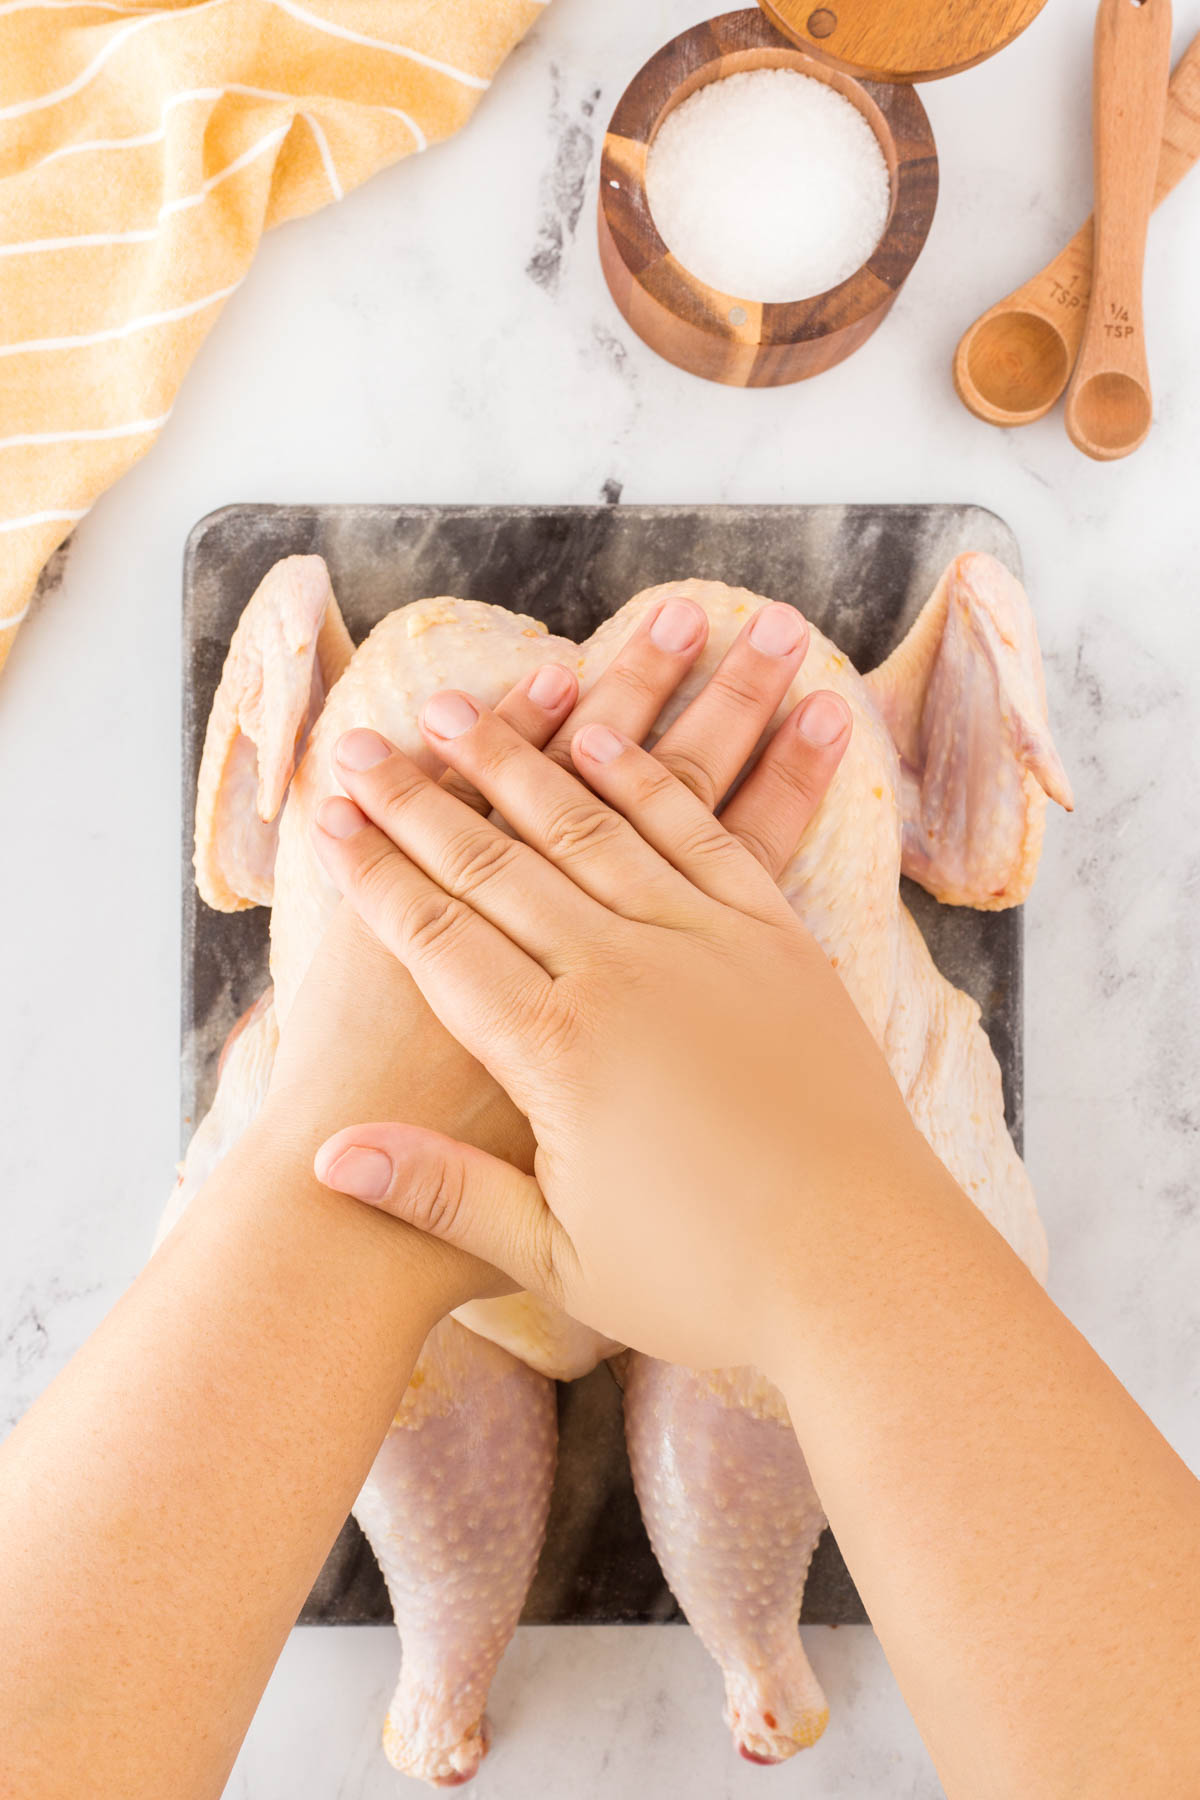 Hands cross over the top of the whole chicken while it sits on a cutting board.